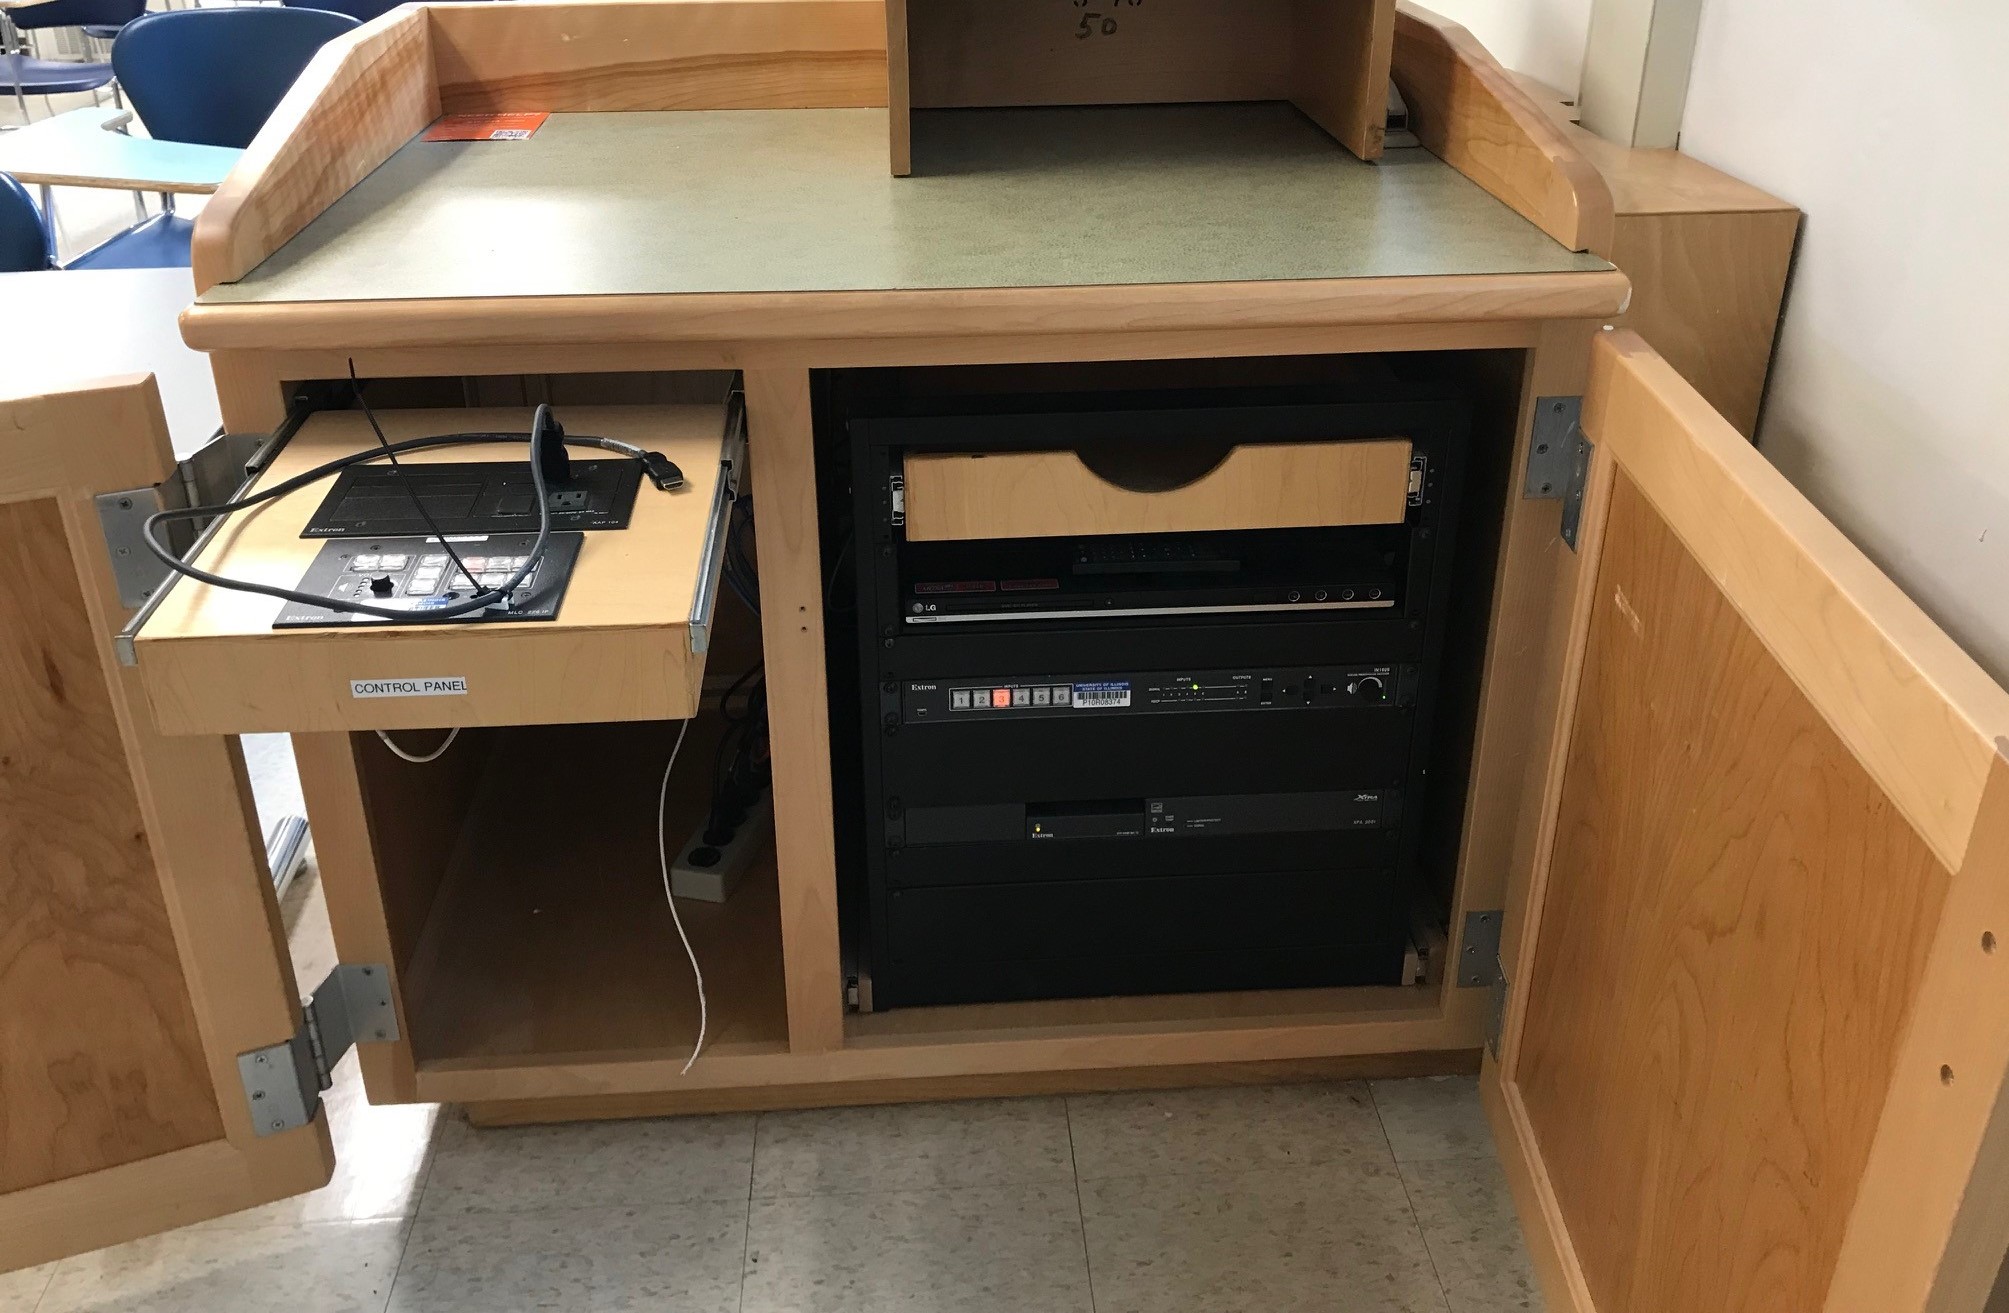 A view of the open cabinet with HDMI input, push button controller, and audio visual rack.